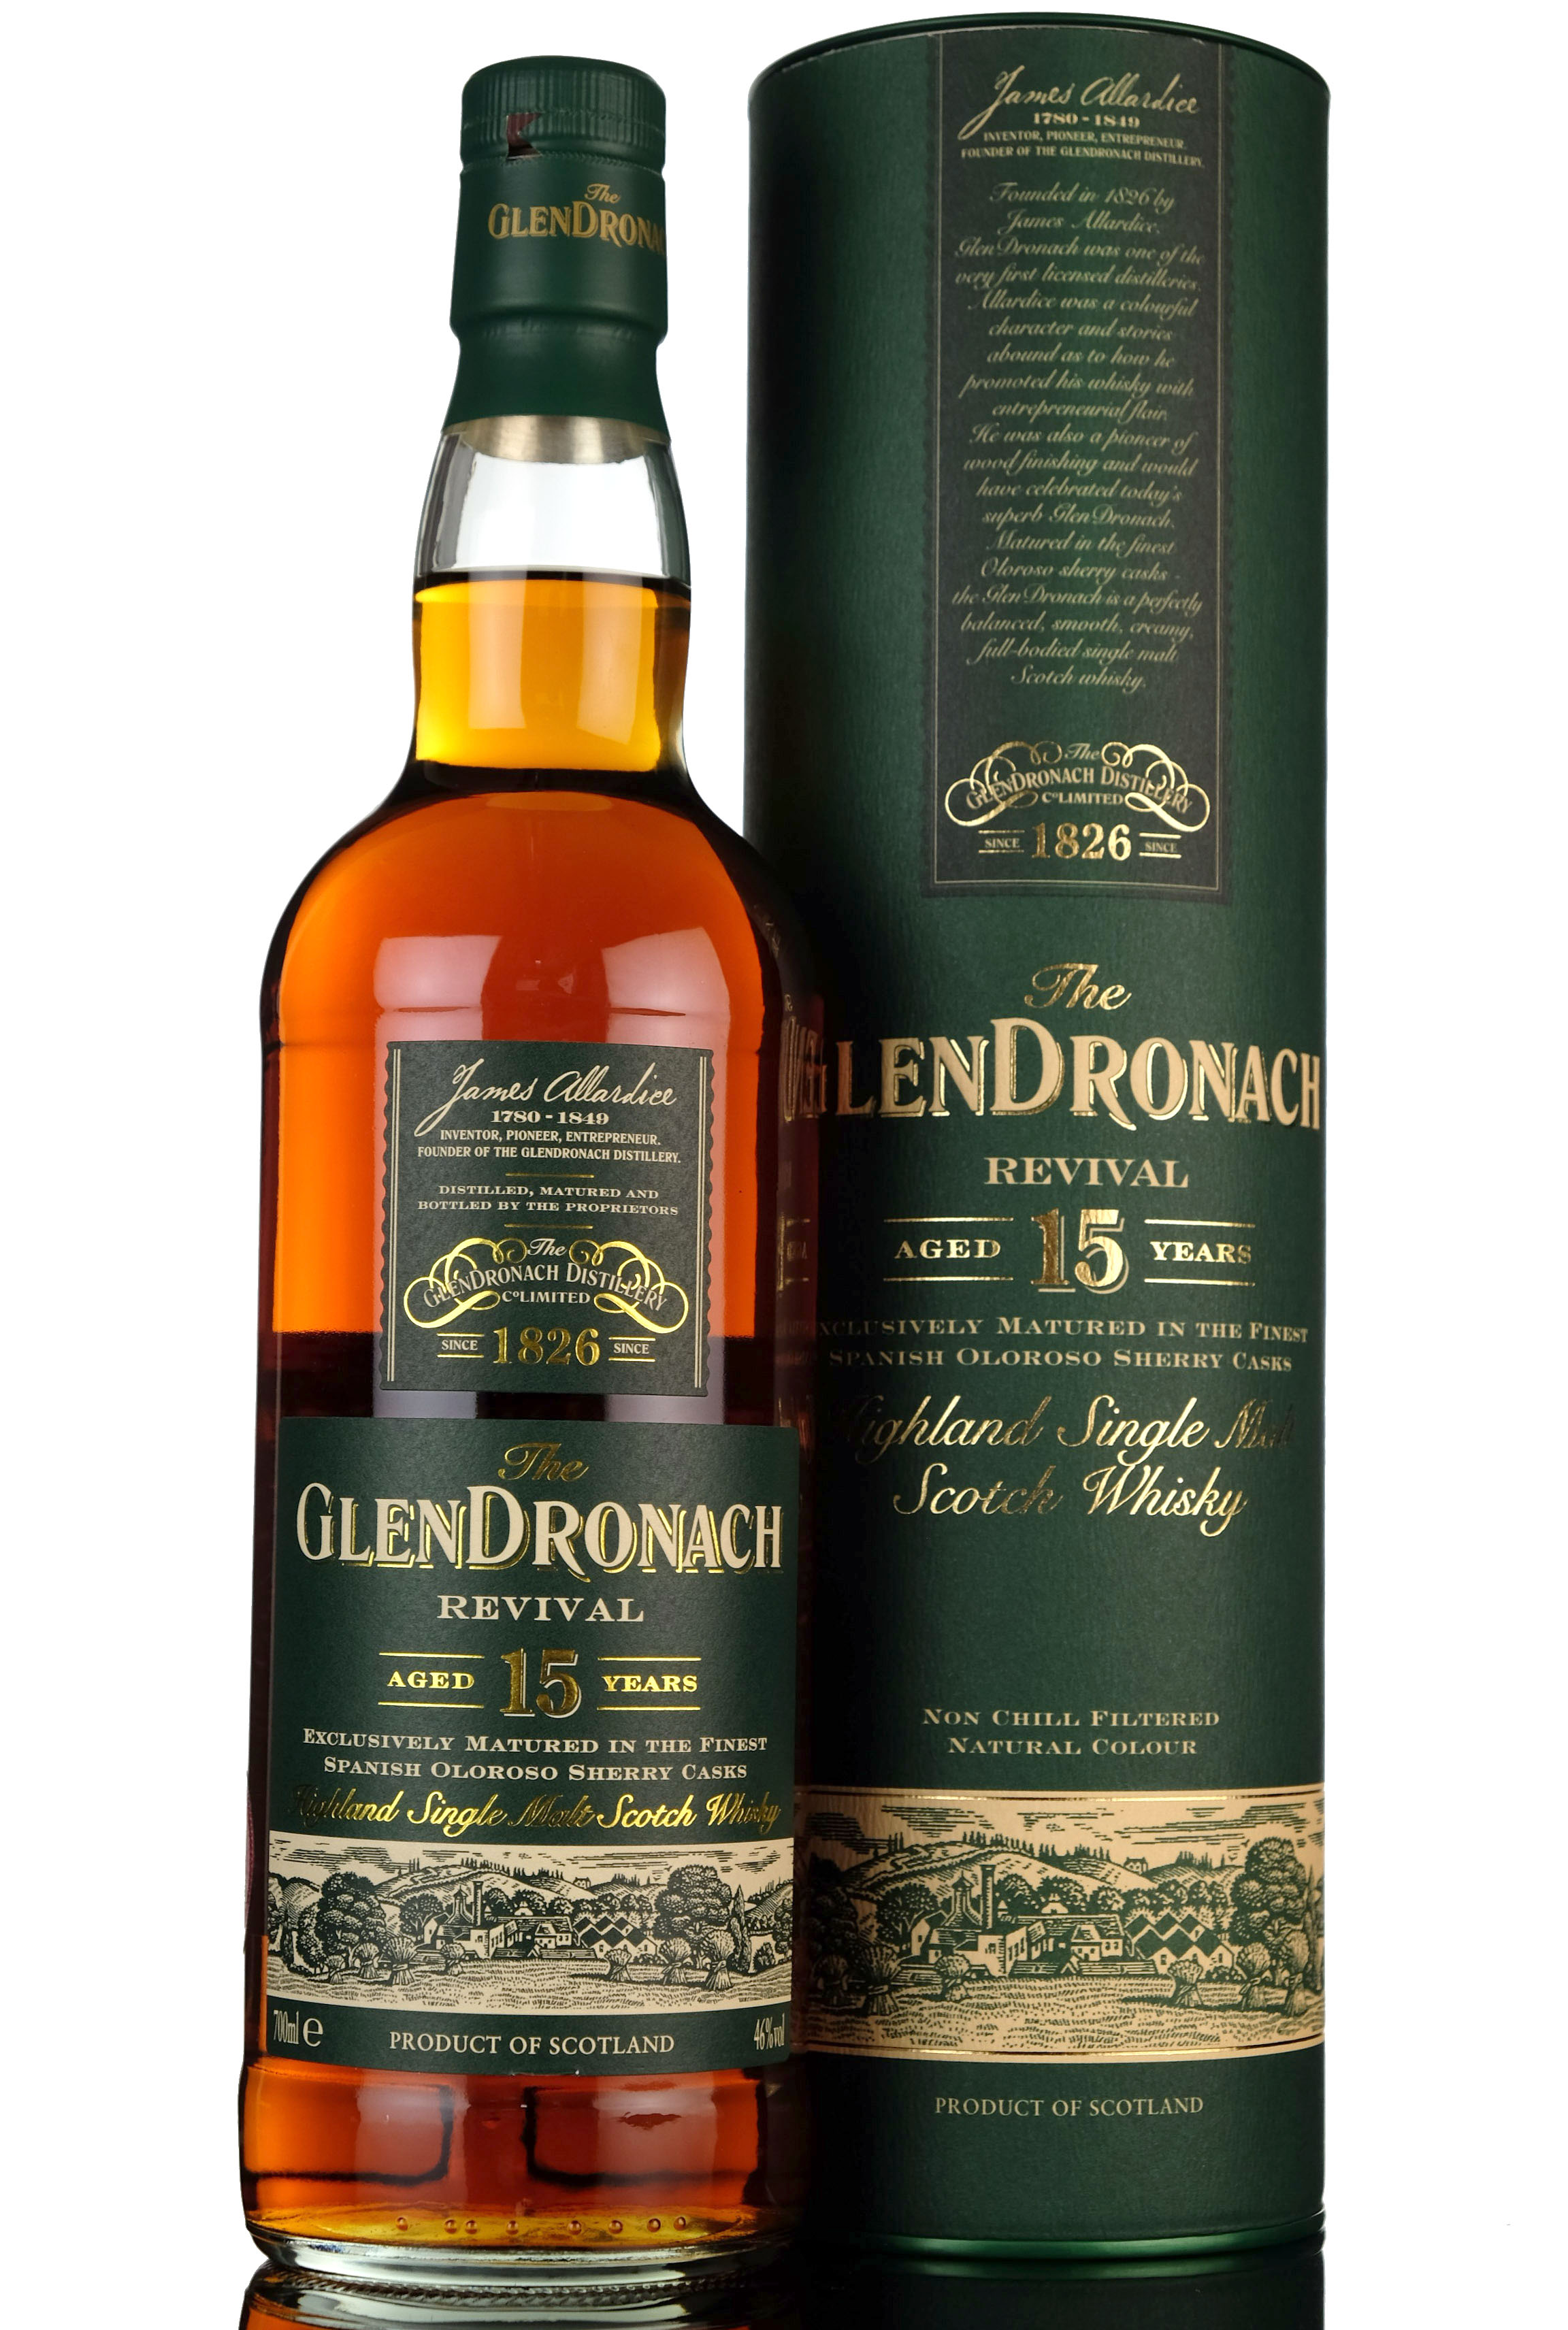 Glendronach 15 Year Old - Revival